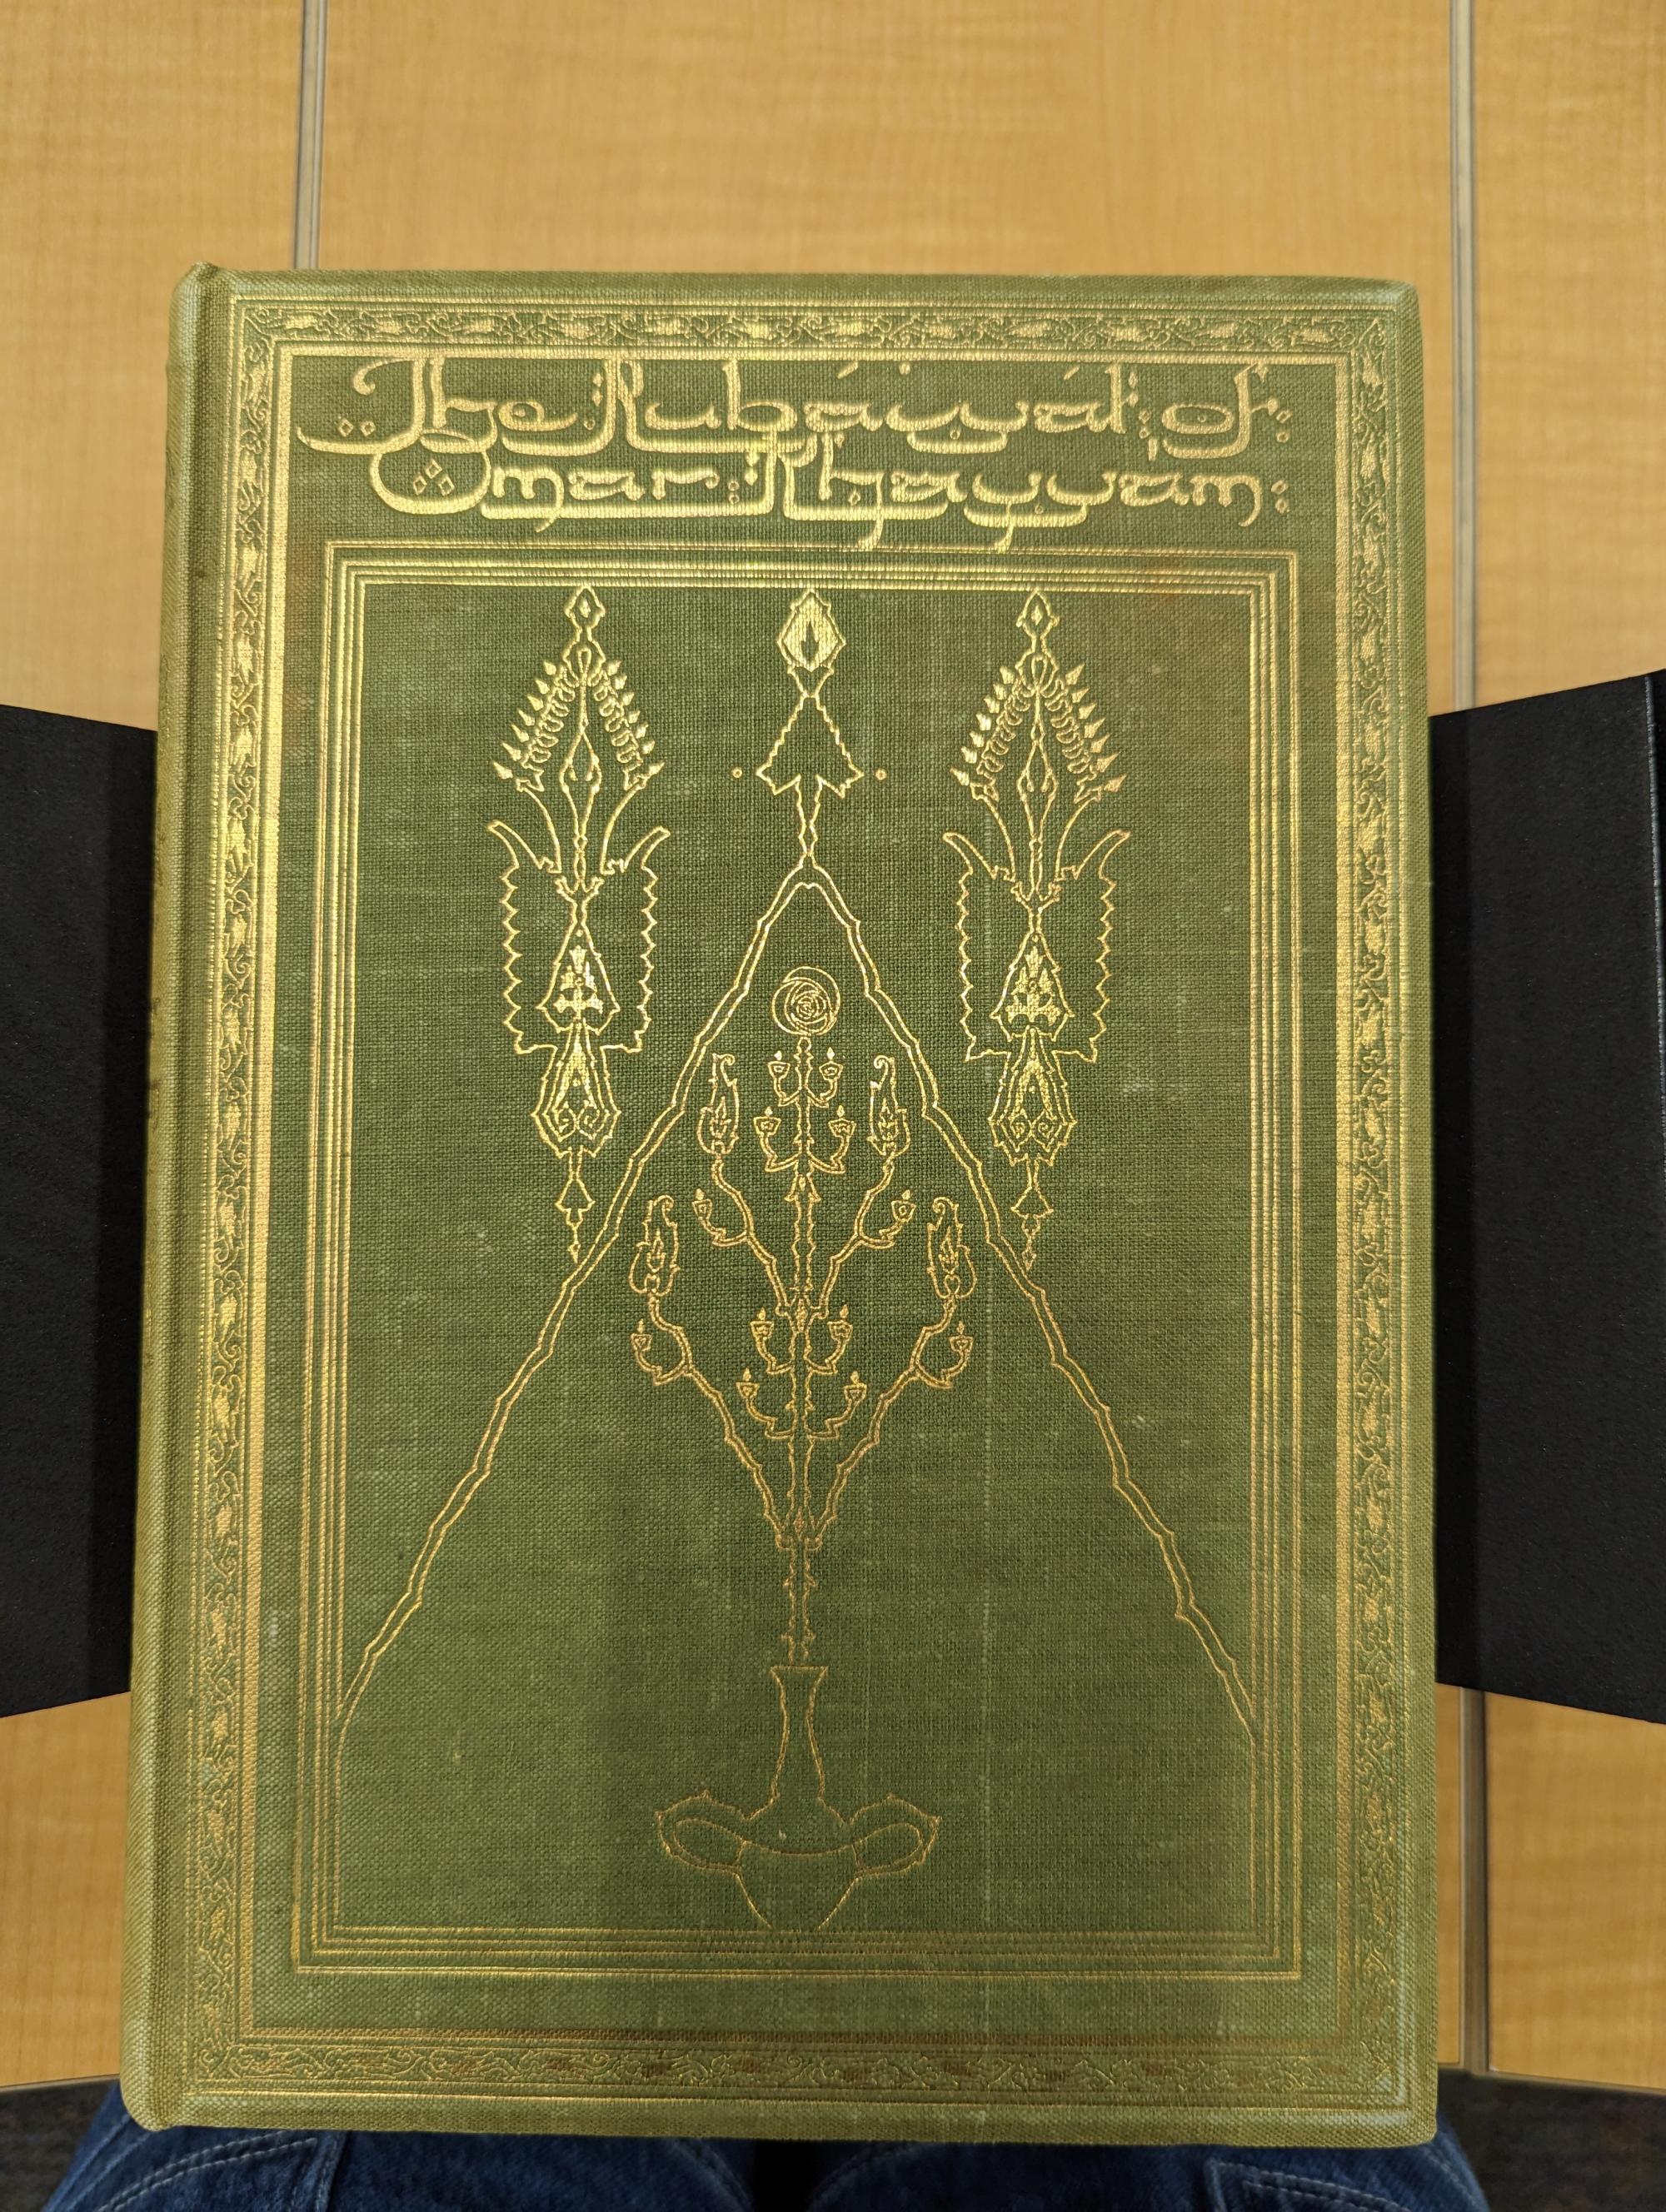 The cover features the Farsi-like font within the title, yet legible in English